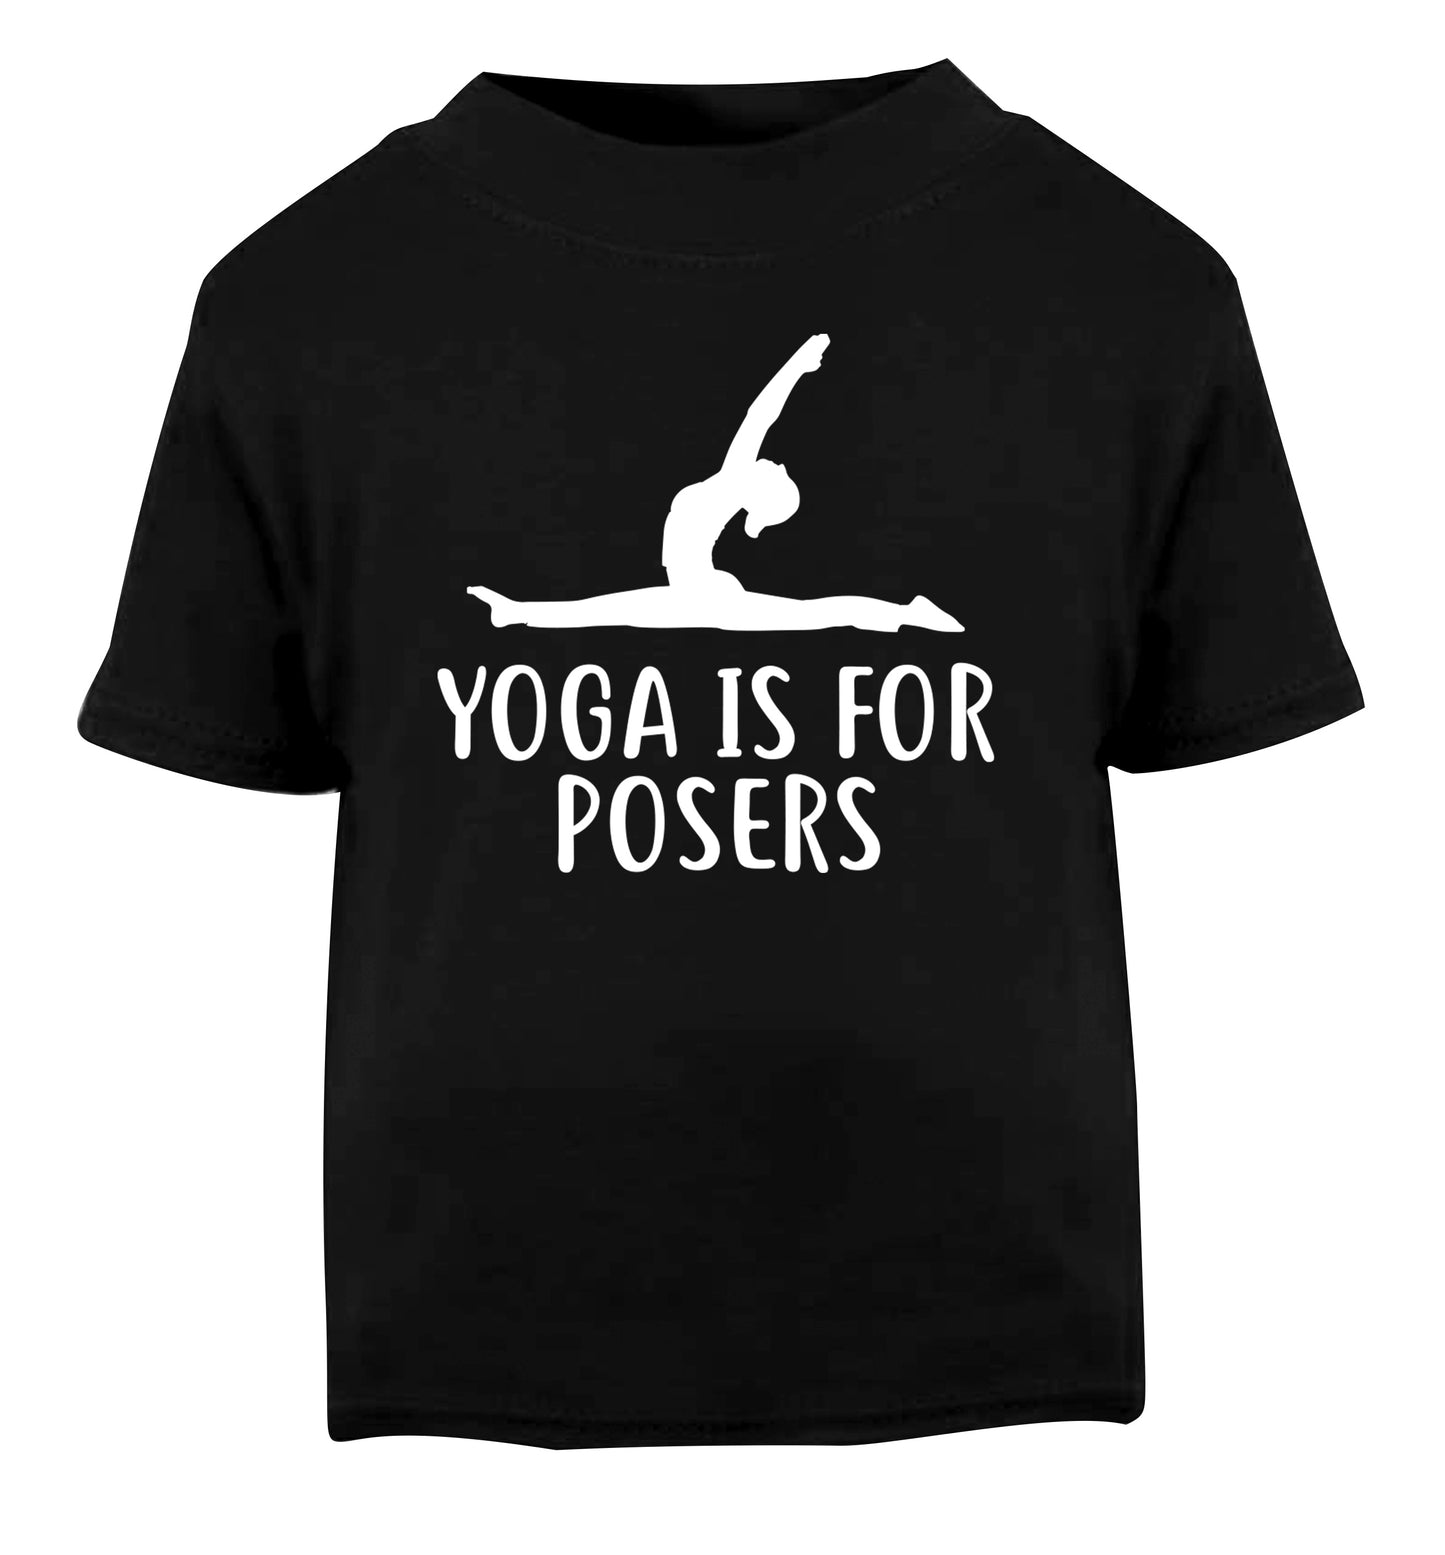 Yoga is for posers Black Baby Toddler Tshirt 2 years